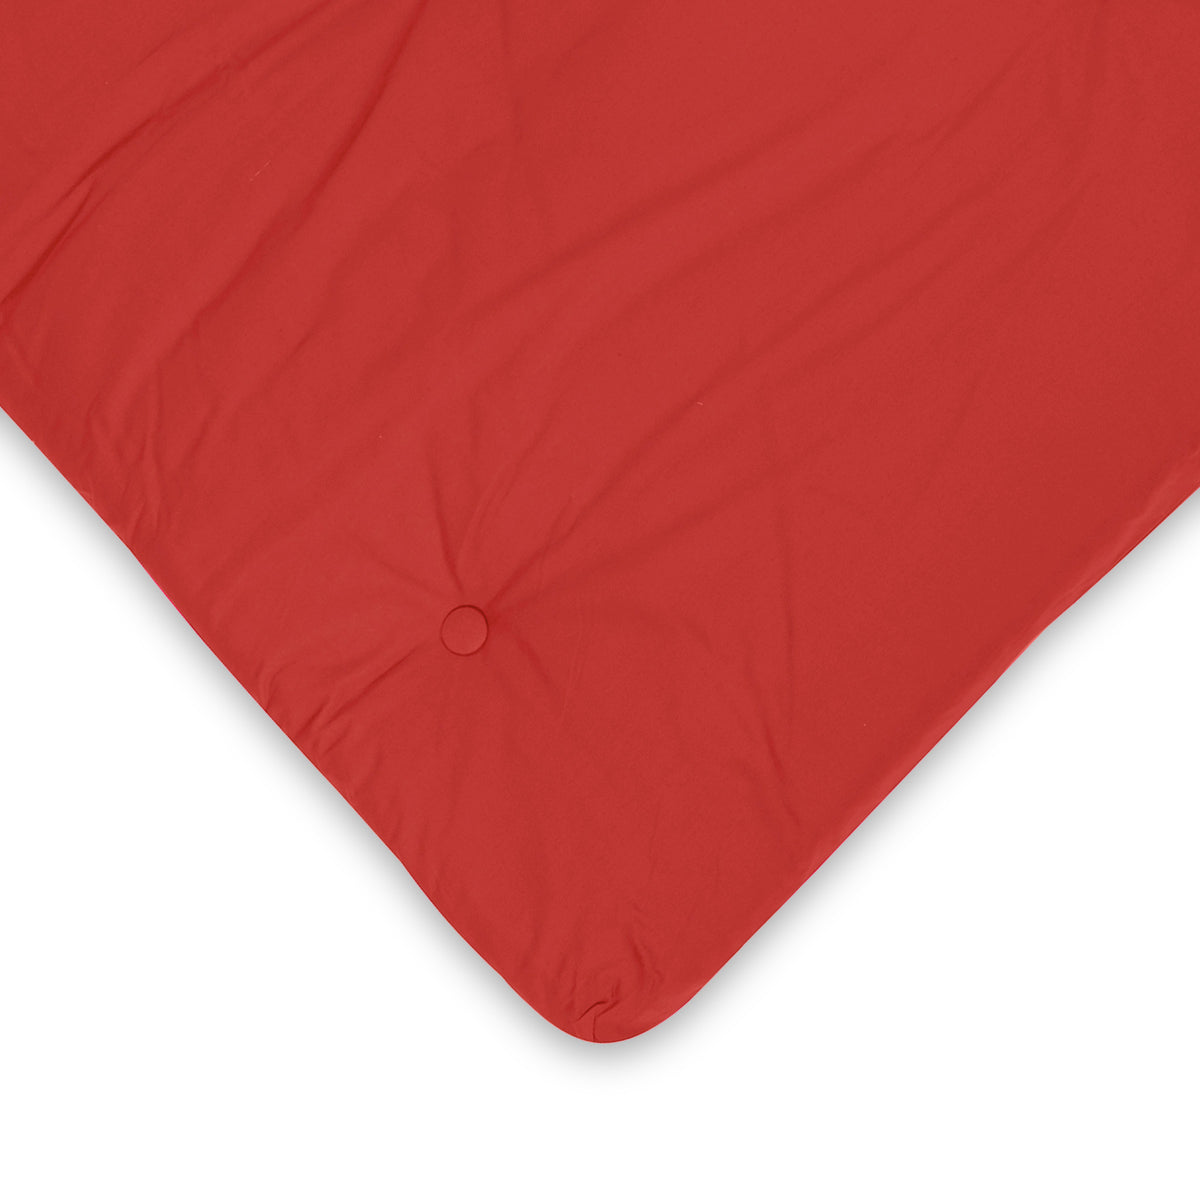 Maggie Double Futon Red from Roseland Furniture